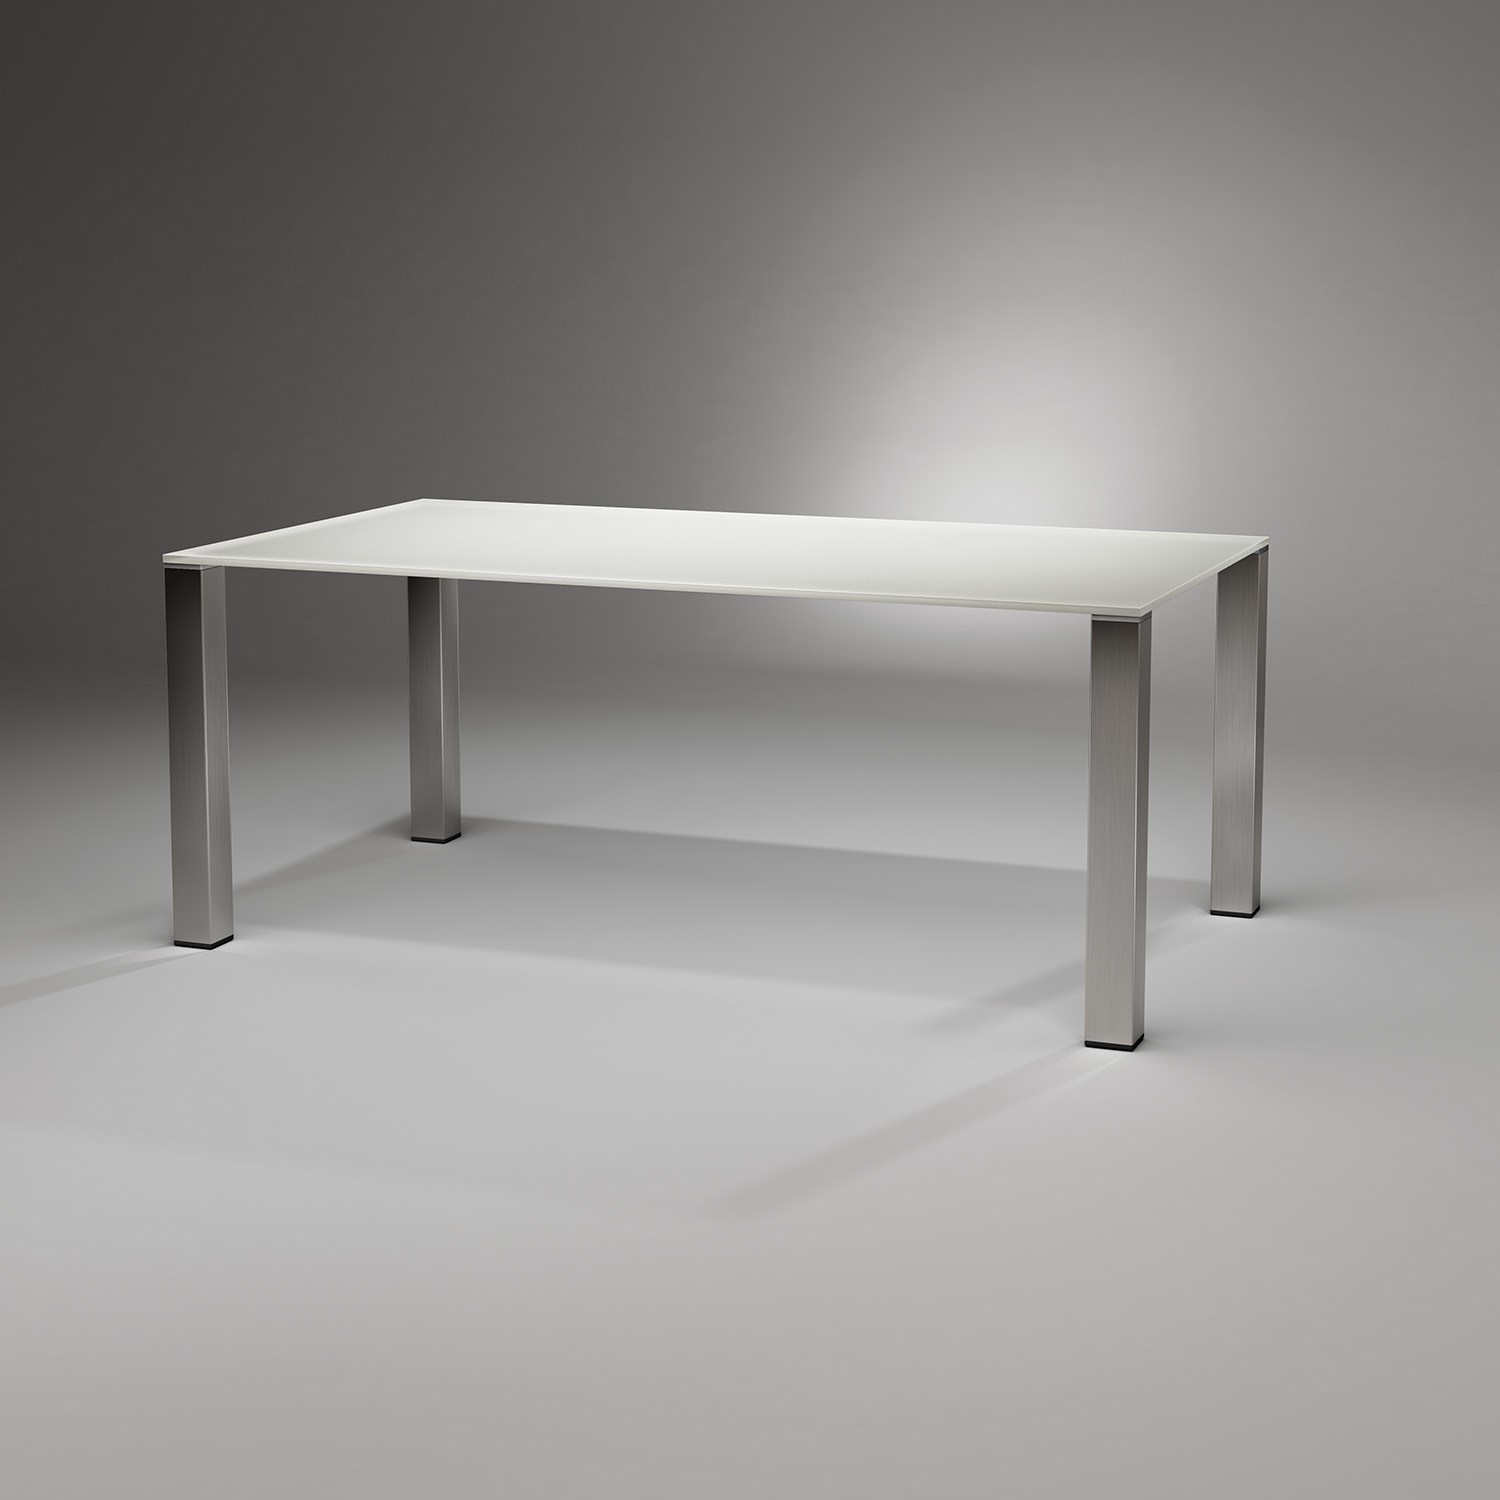 Glass dining table QUADRO magnum by DREIECK DESIGN: QM 2072 - OPTIWHITE velvetcolor pure white - table feet stainless steel brushed